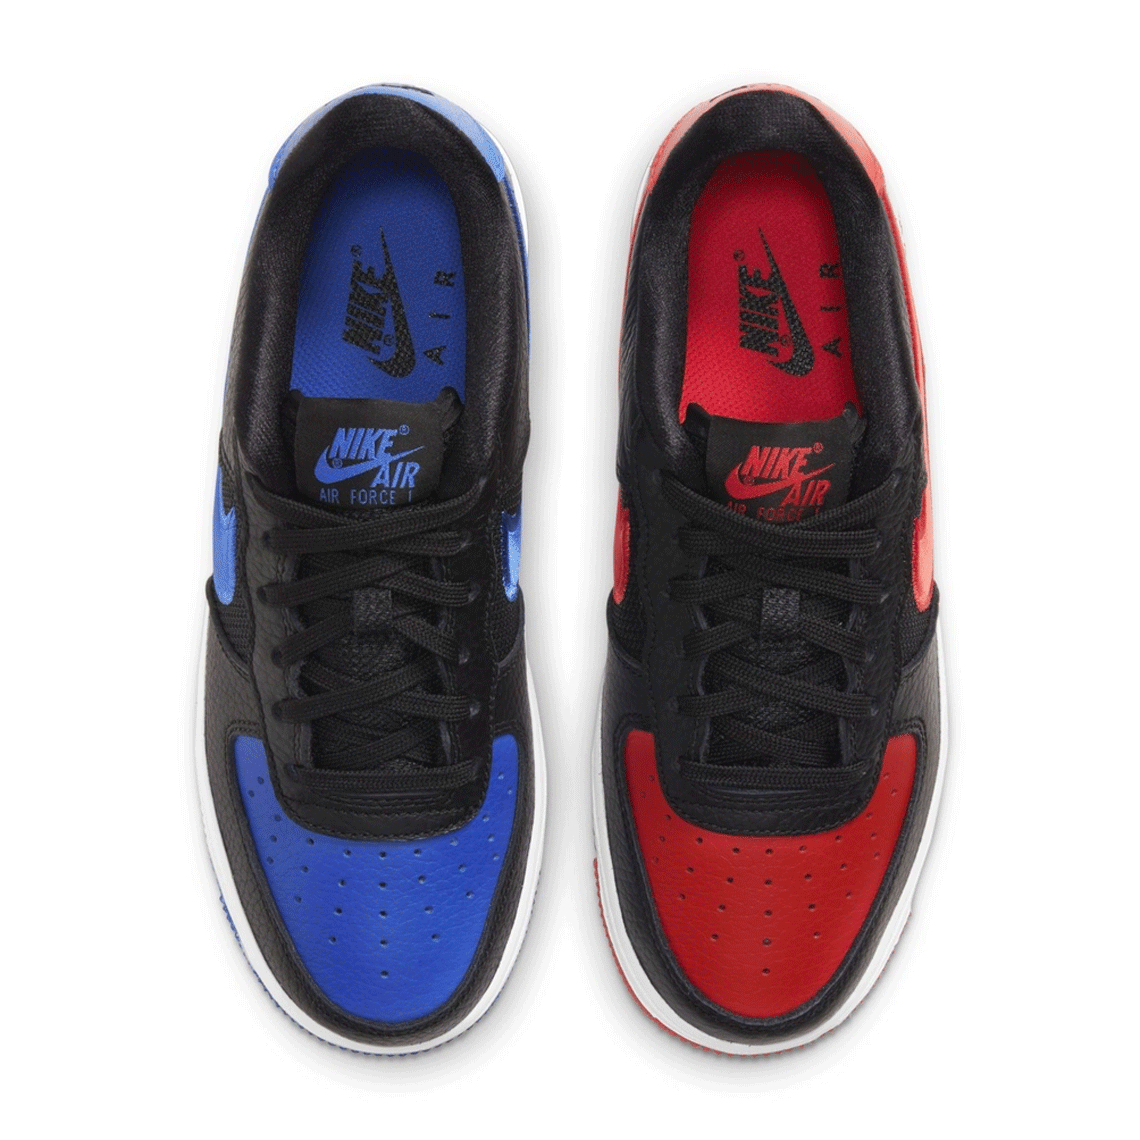 Nike Air Force 1 82 Royal Bred, Where To Buy